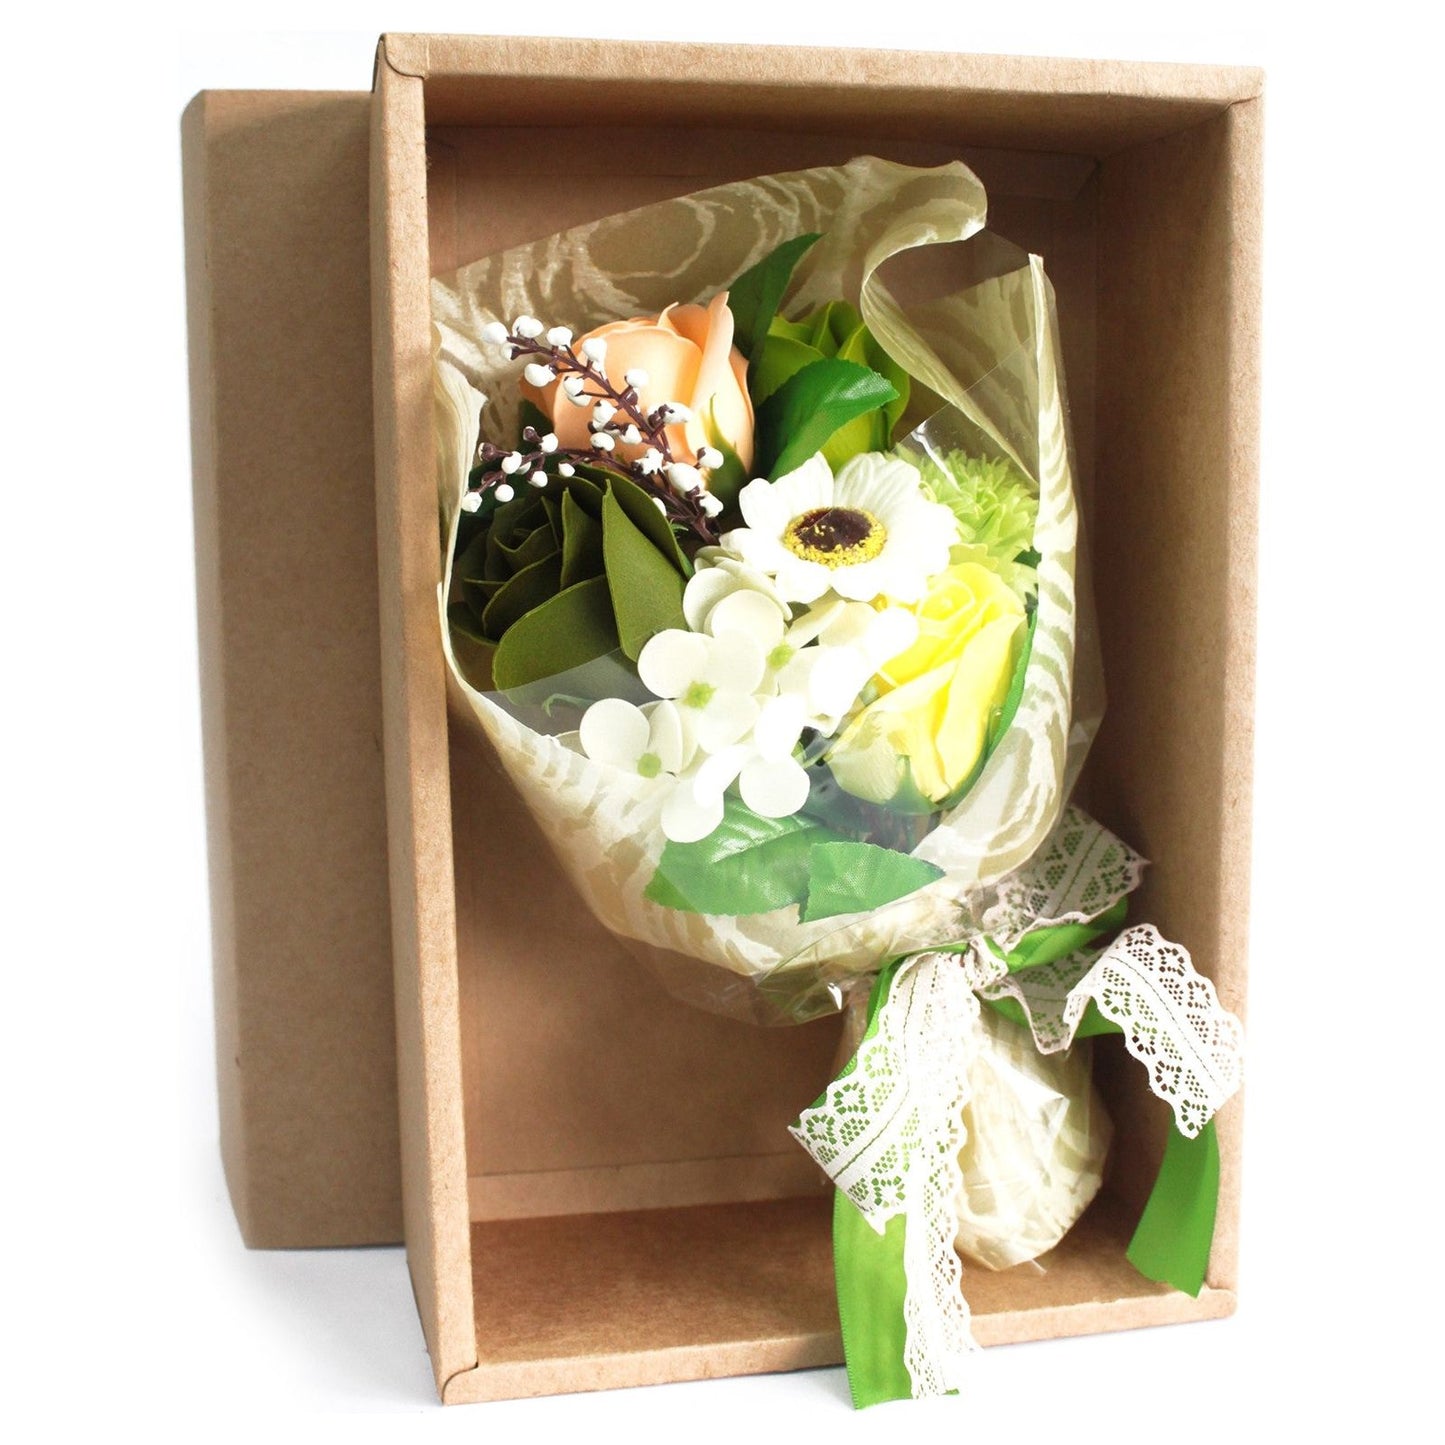 Boxed Hand Soap Flower Bouquet - Greens - Ashton and Finch